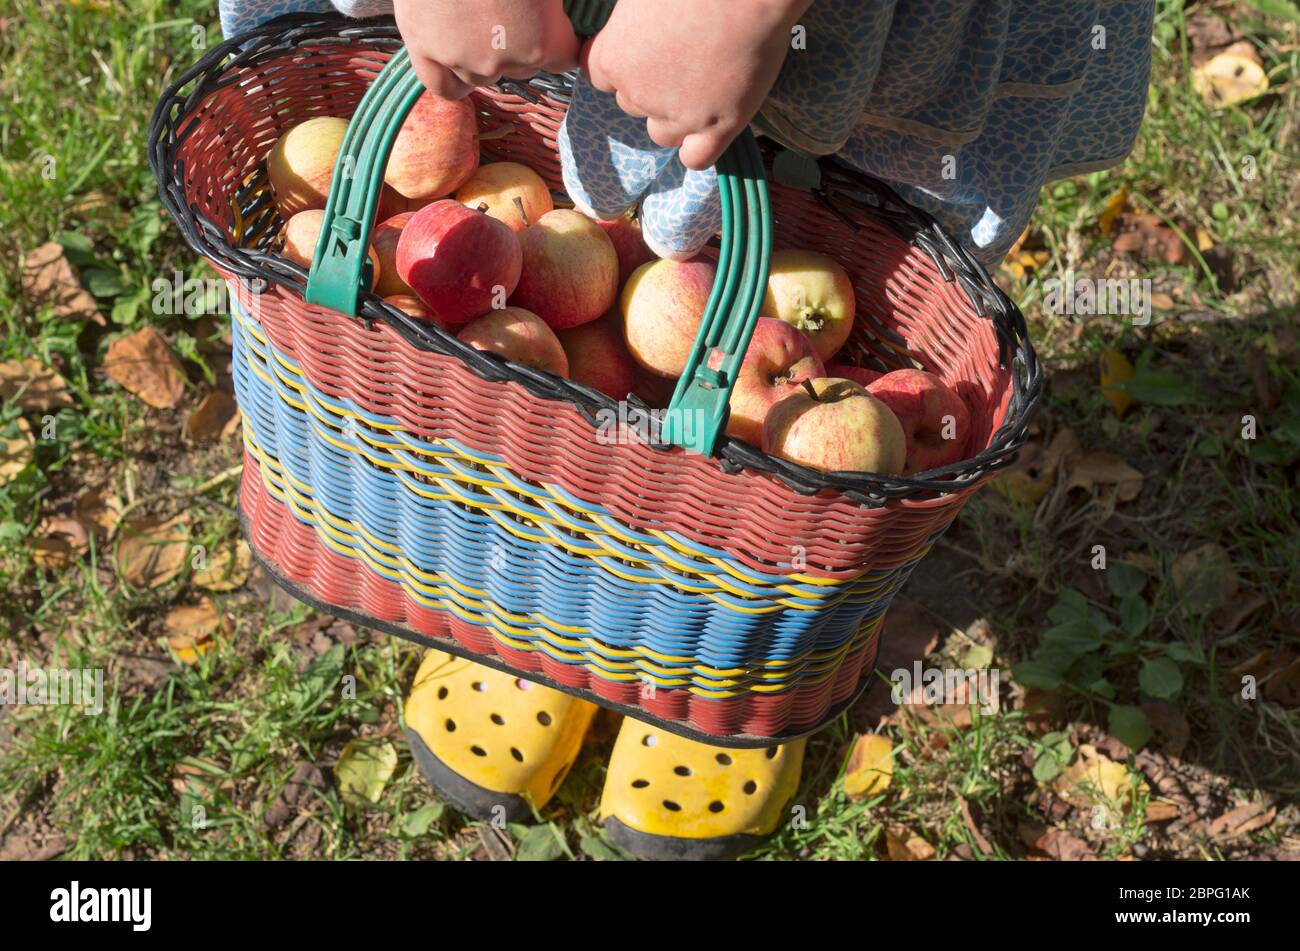 Wicker retro bag full of apples is held up with difficulty by a farm girl closeup Stock Photo